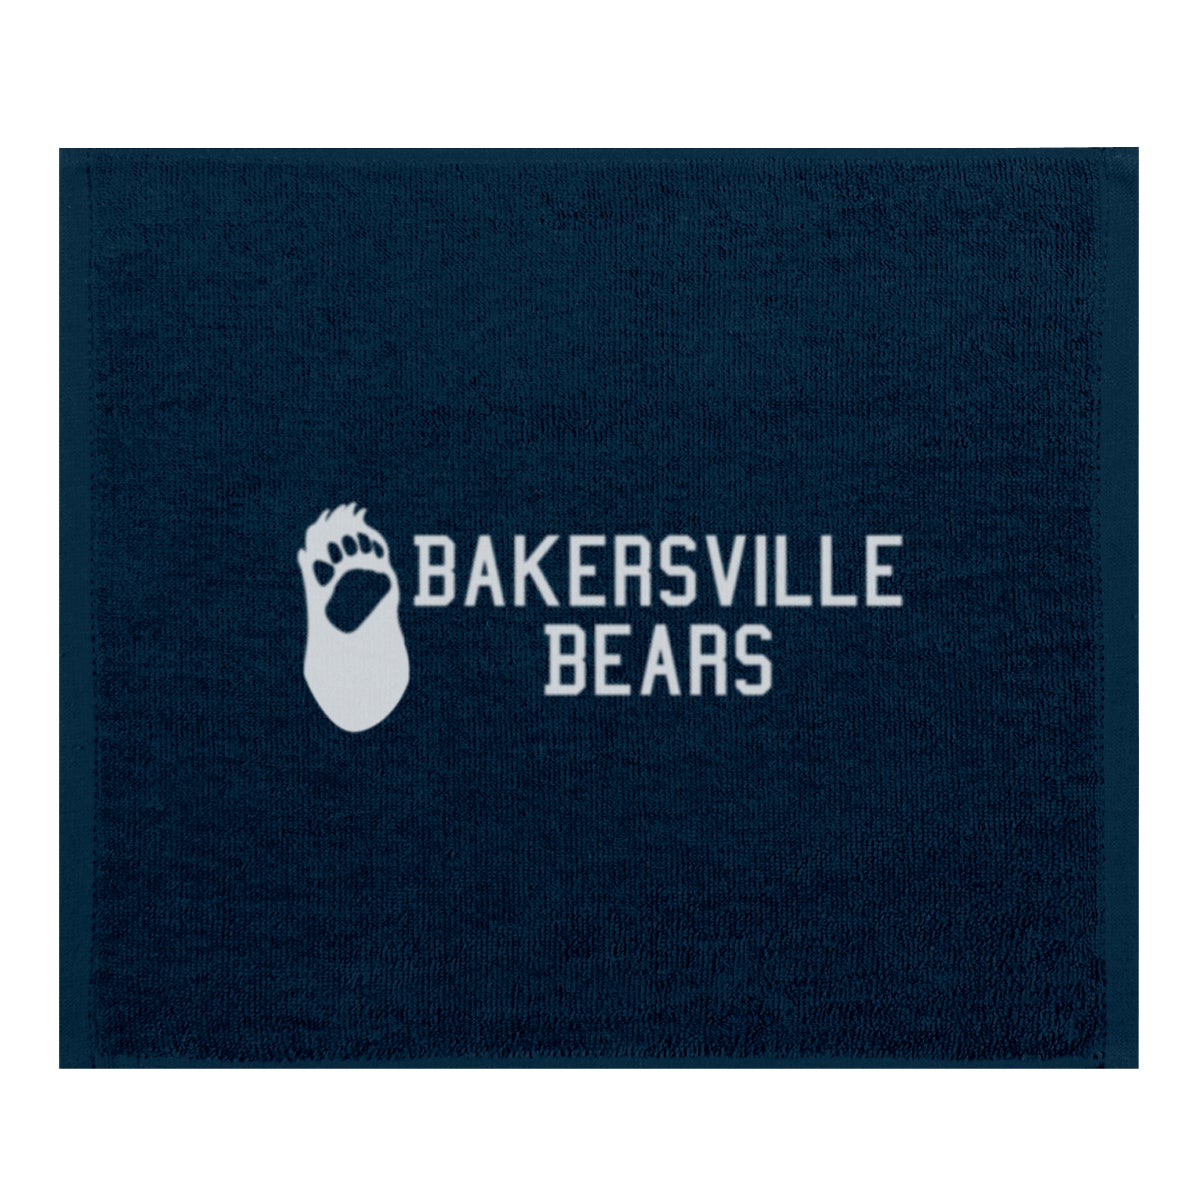 Rally Towel Towels Hit Promo Navy Single Color 